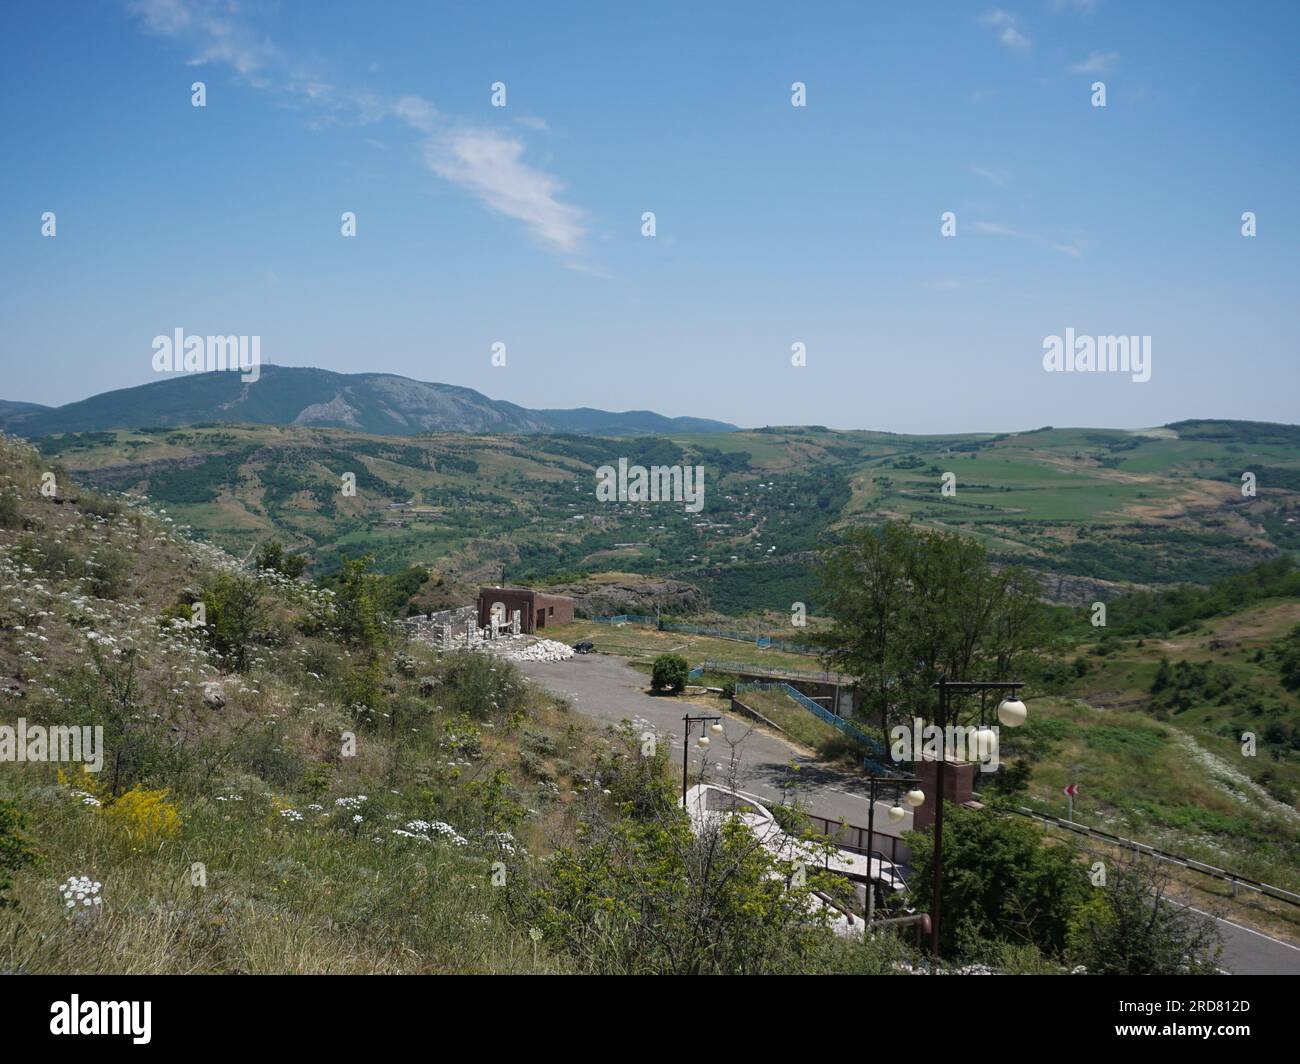 Stepanakert, Azerbaijan. 13th June, 2019. The view of mountains outside the town of Shusha, Nagorno-Karabakh. The unrecognised yet de facto independent country in South Caucasus, Nagorno-Karabakh (also known as Artsakh) has been in the longest-running territorial dispute between Azerbaijan and Armenia in post-Soviet Eurasia since the collapse of Soviet Union. It is mainly populated by ethnic Armenians. (Photo by Jasmine Leung/SOPA Images/Sipa USA) Credit: Sipa USA/Alamy Live News Stock Photo